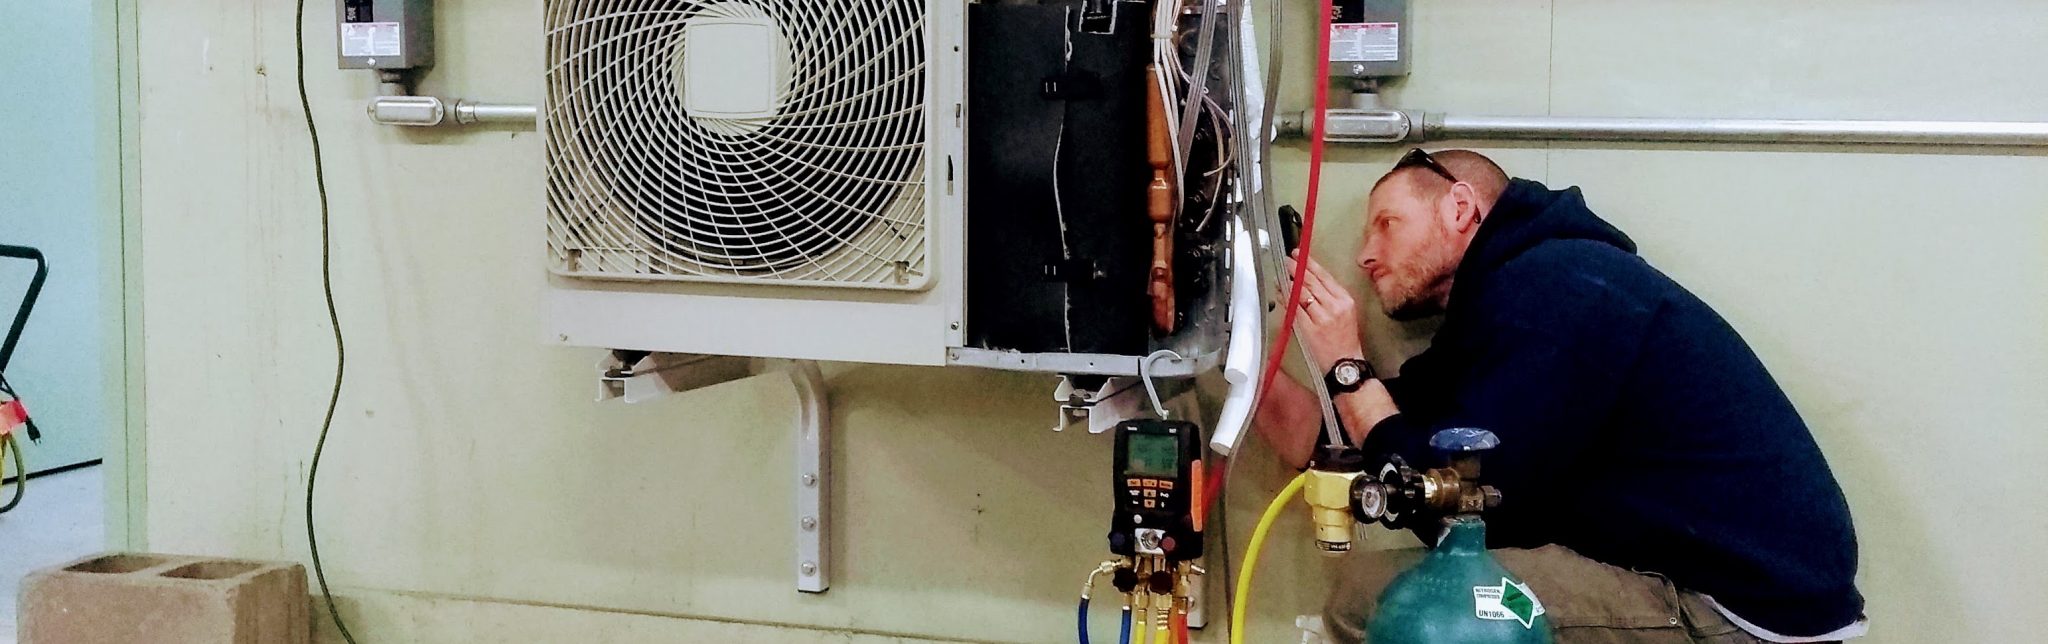 Problems with heat pumps